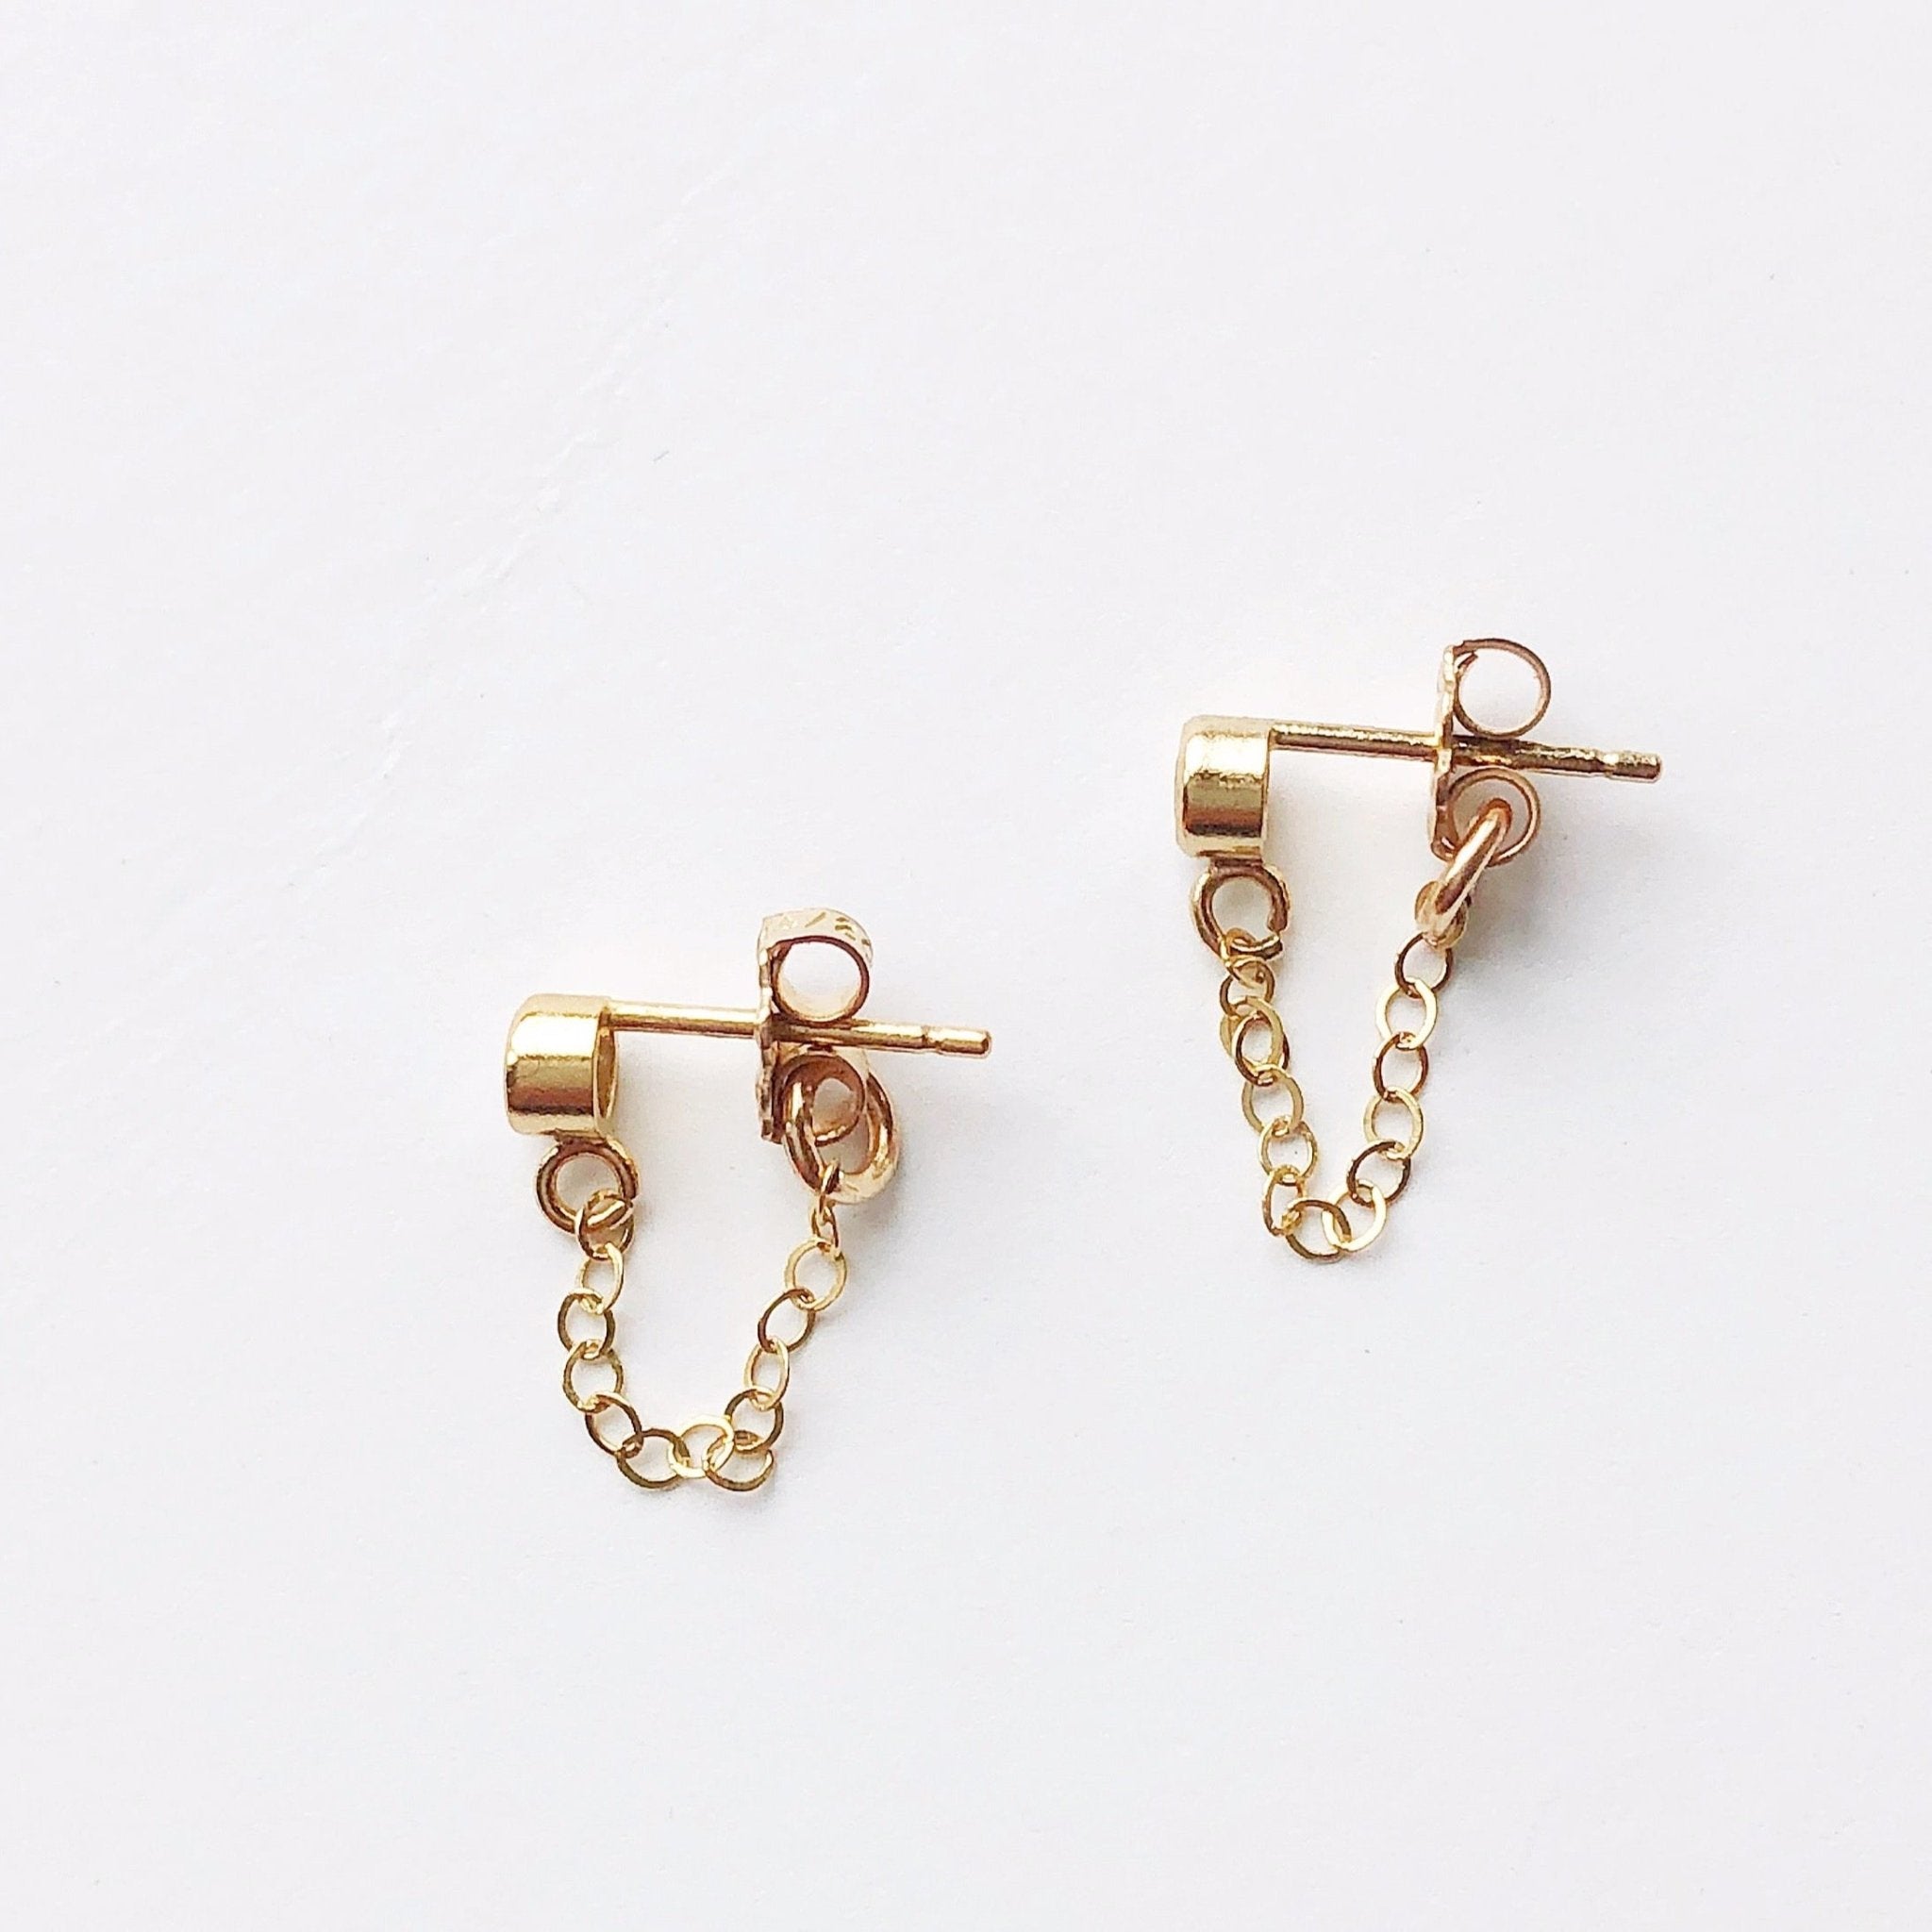 Side view of 3mm white topaz and gold chain stud earrings. Kate Studs by Sarah Cornwell Jewelry